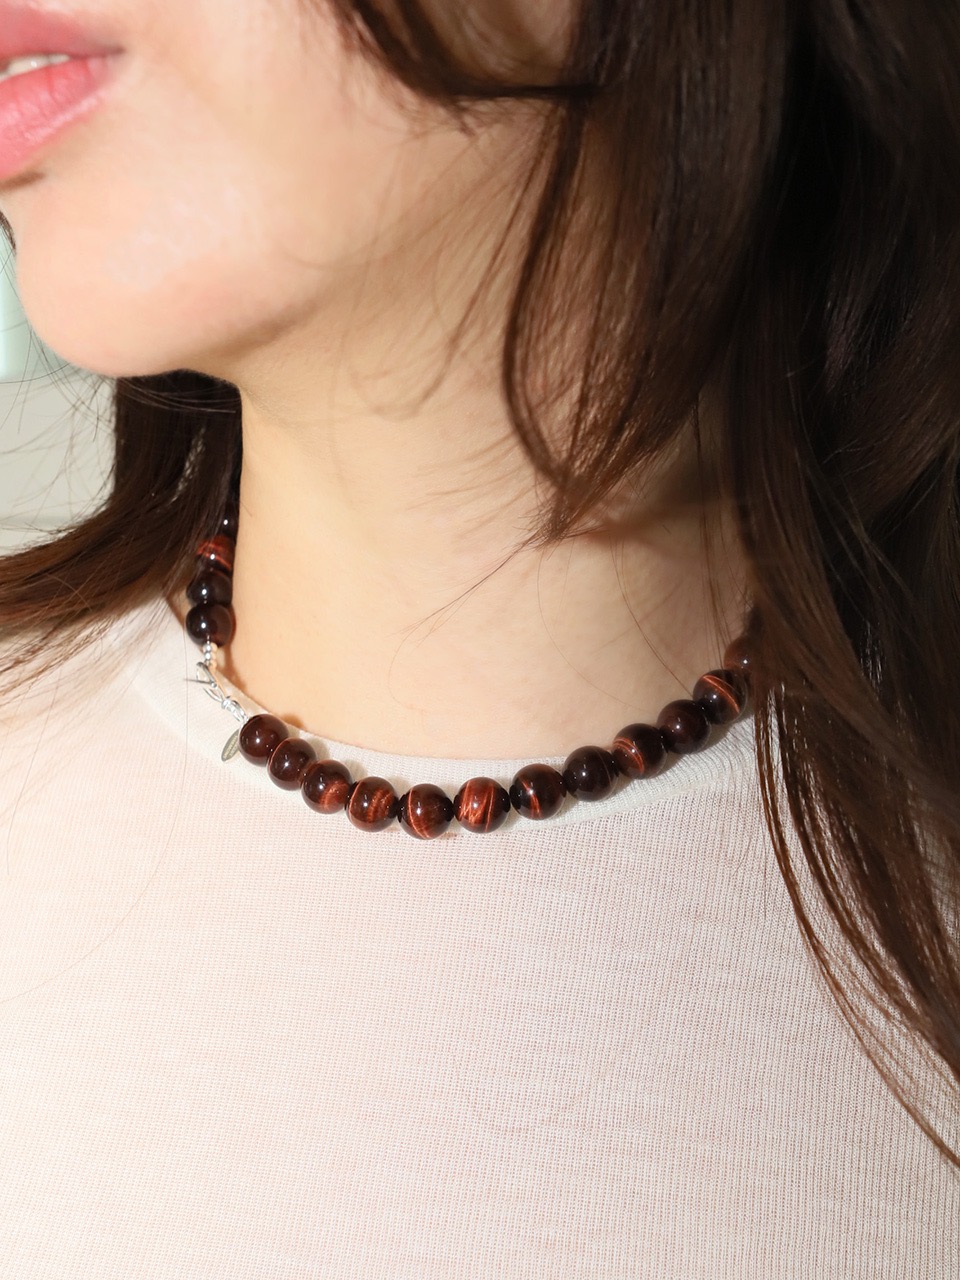 Red Tiger Eye Necklace / 10mm